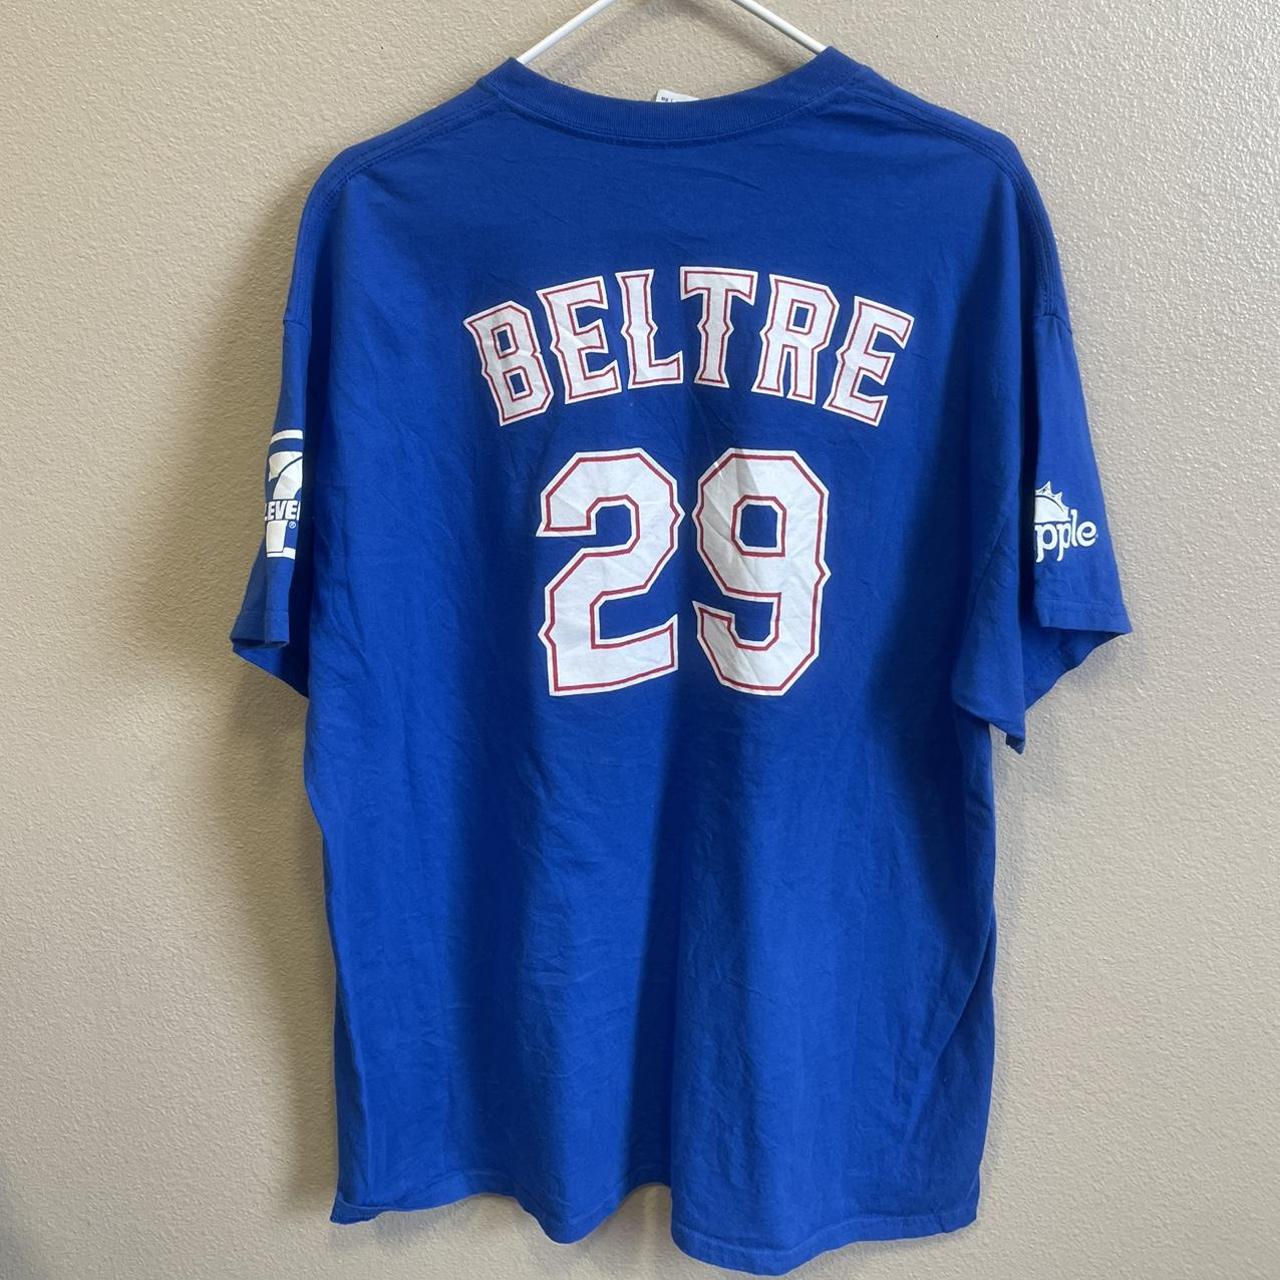 Adrian Beltre T-Shirts for Sale